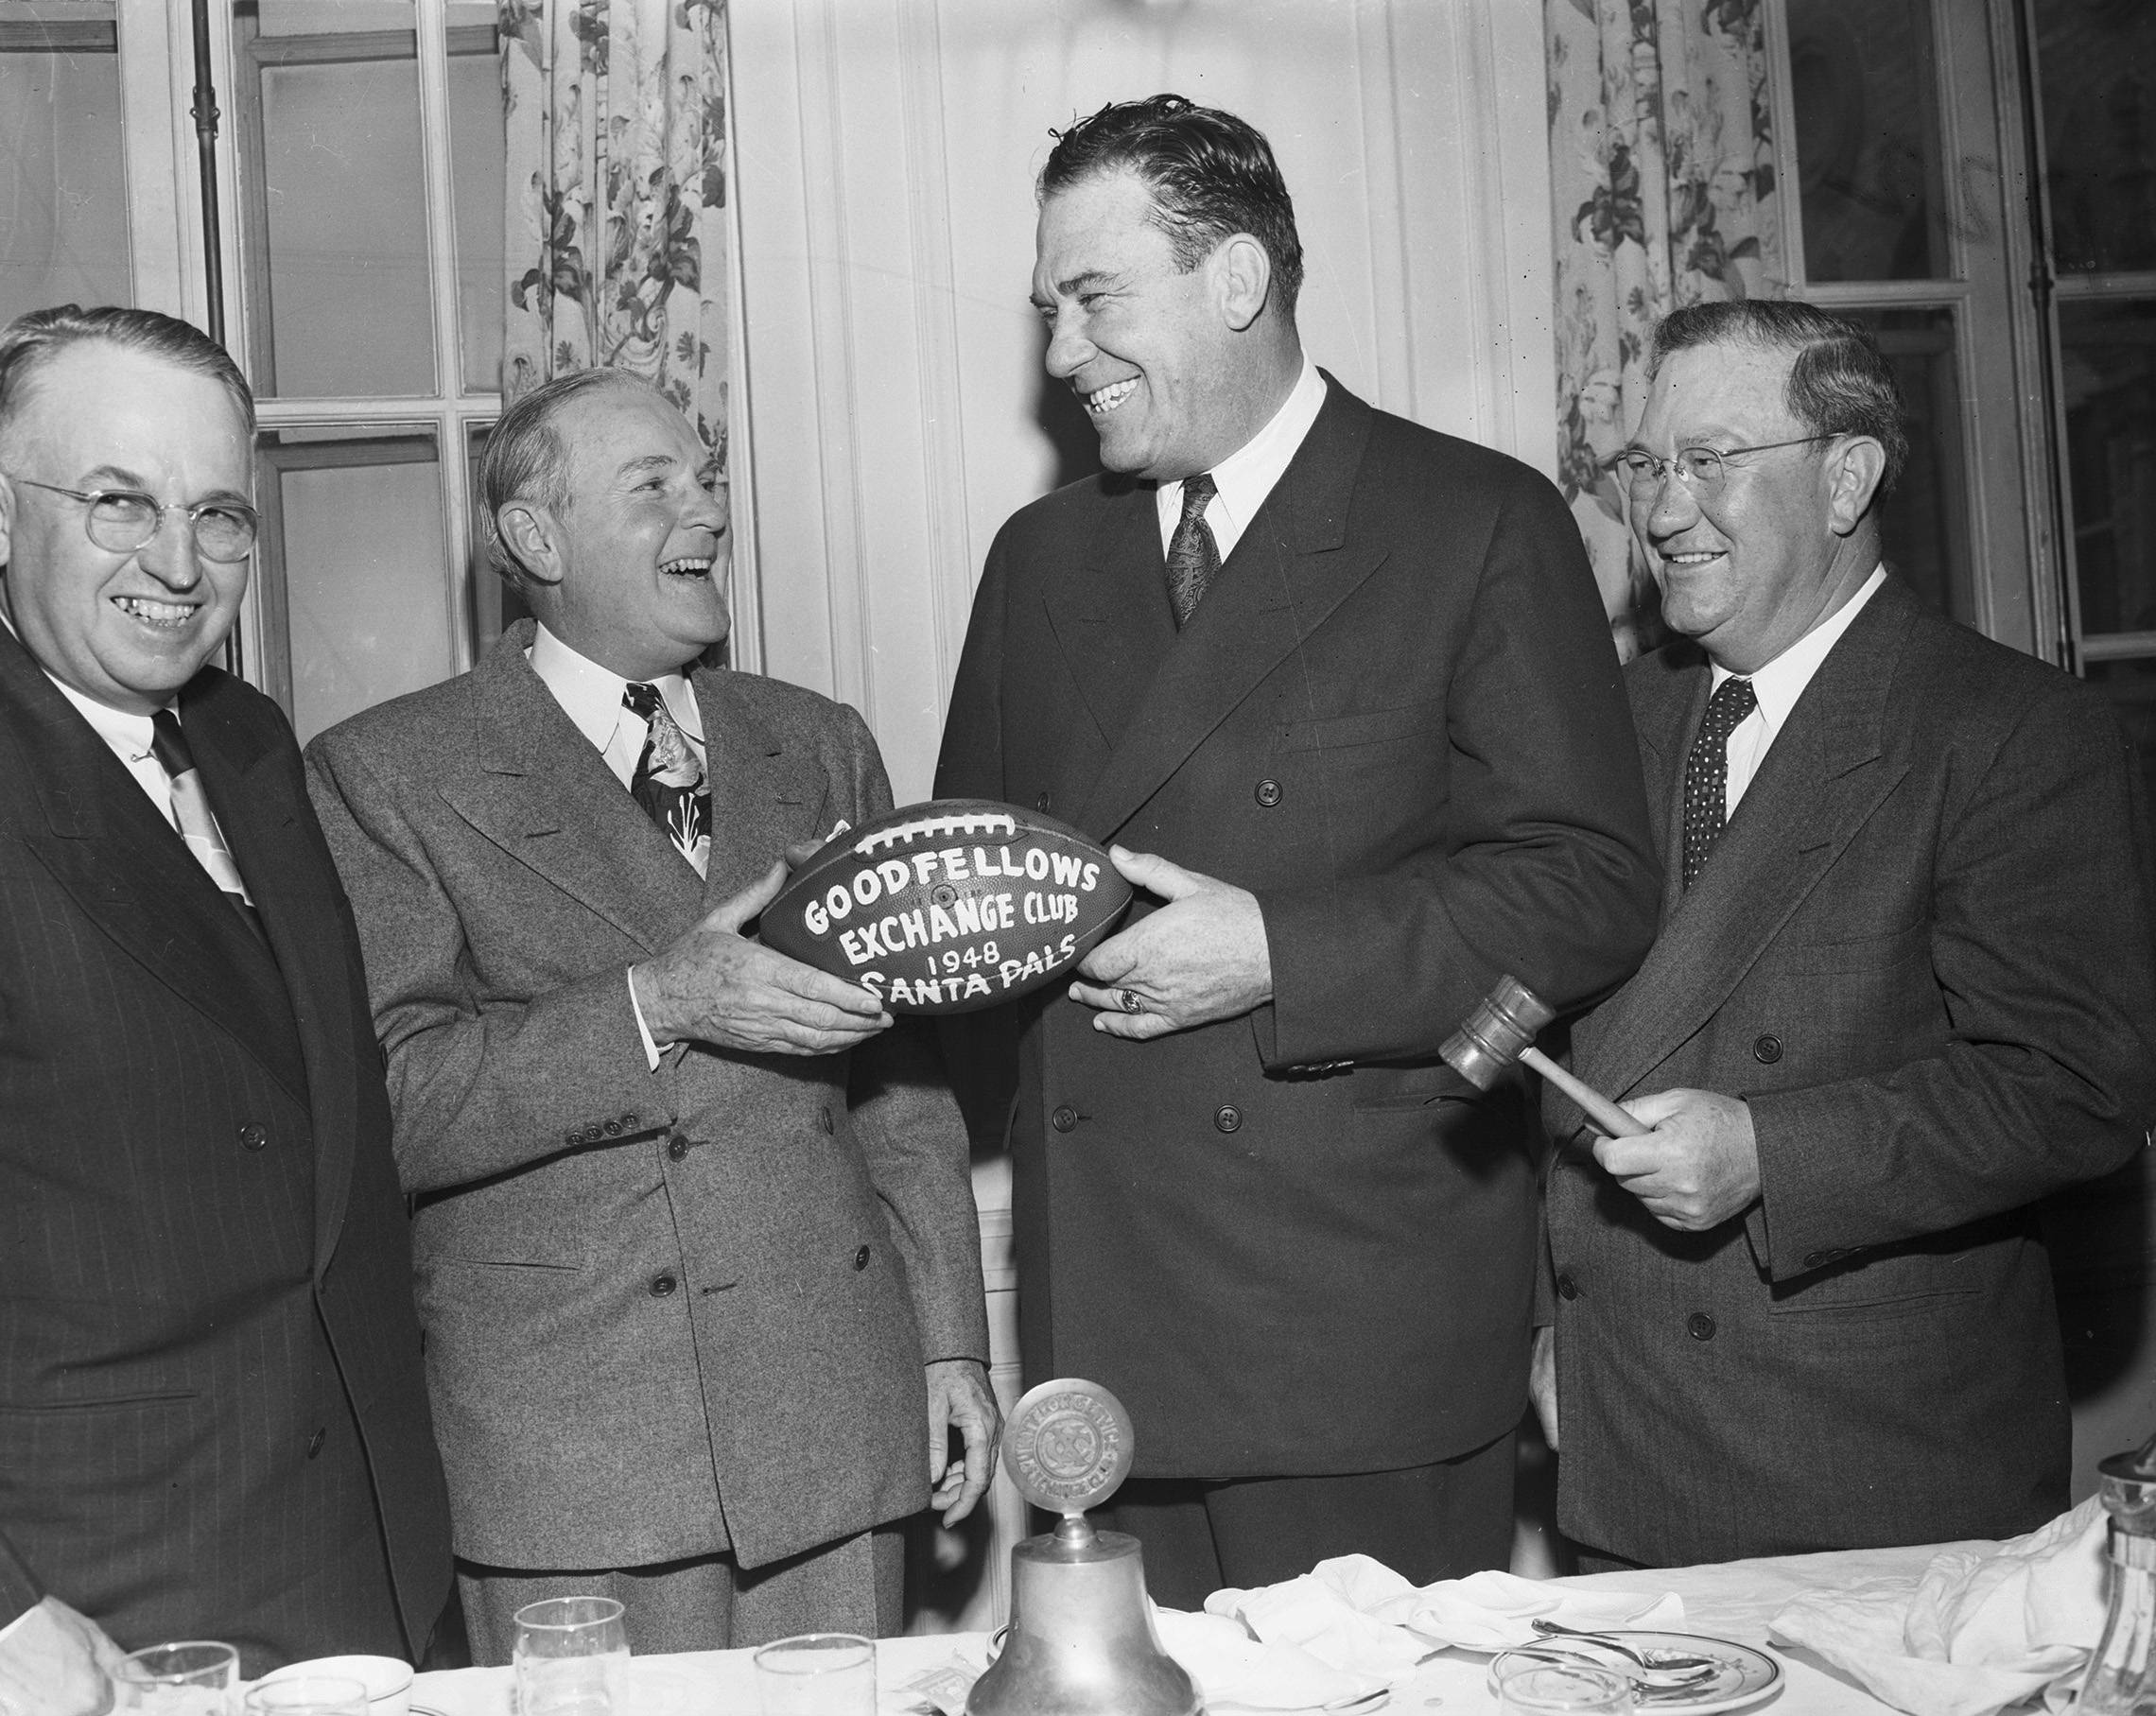 Group of men at a Goodfellows fundraising event, holding an autographed TCU football.